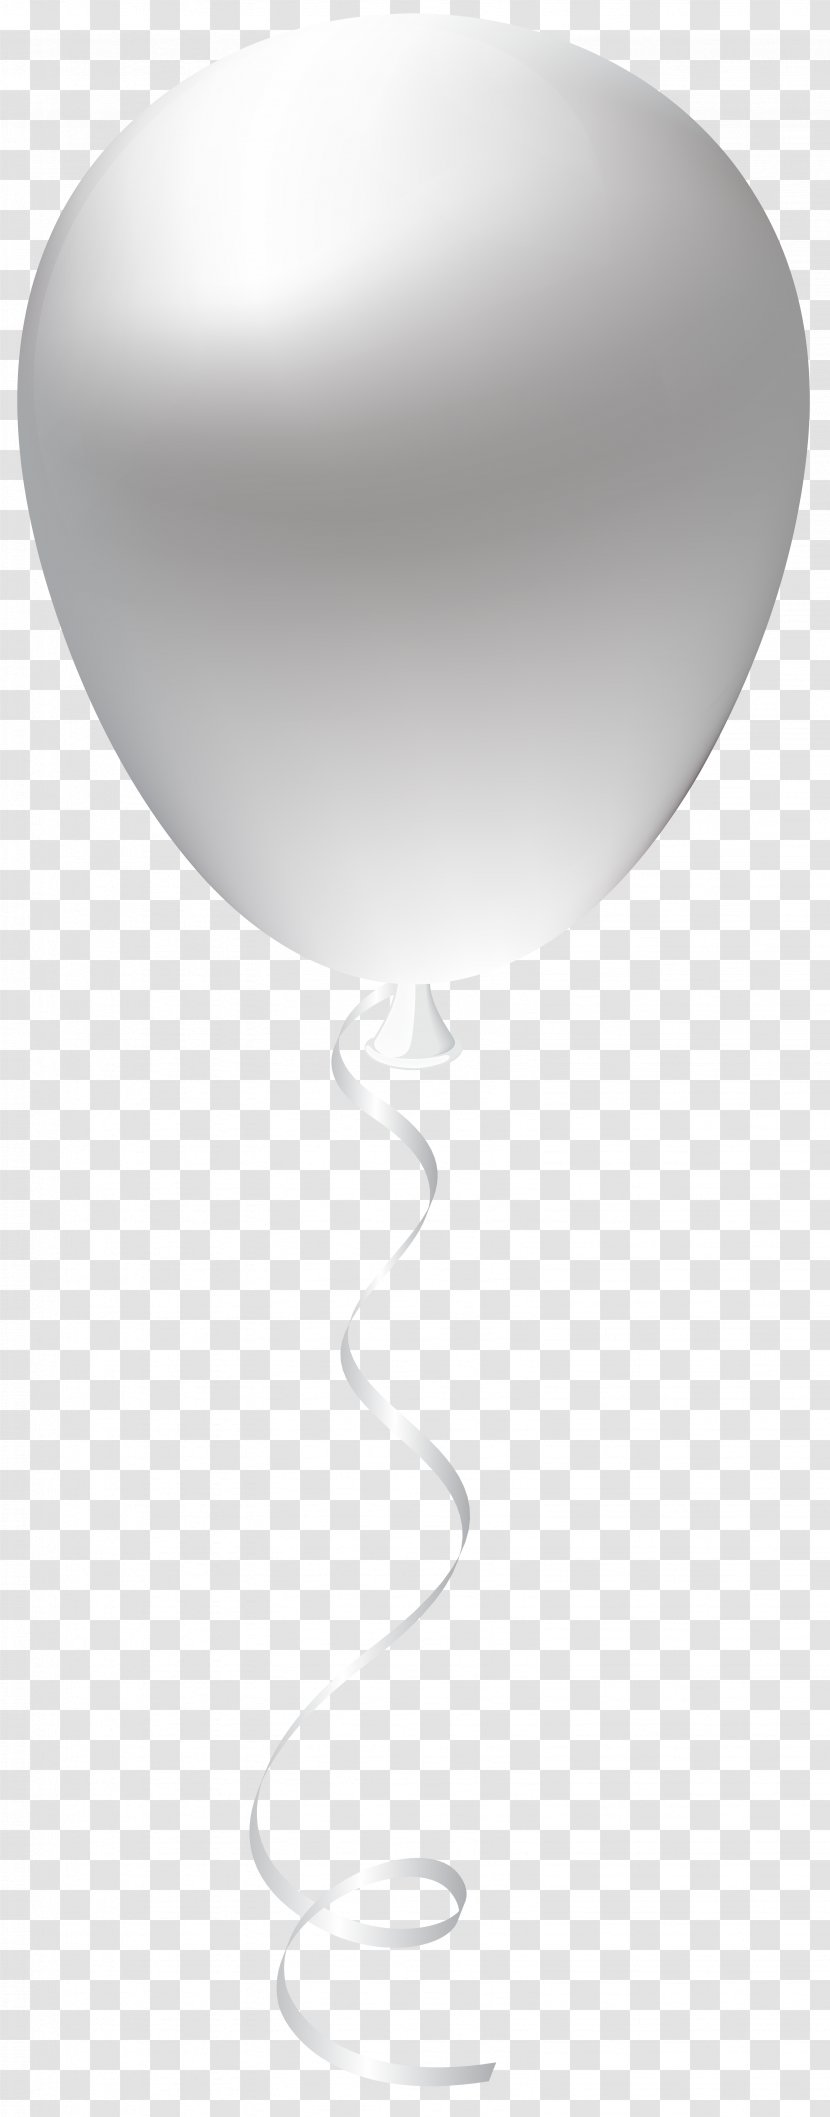 White Balloons * Image Clip Art - Red - Balloon Transparent PNG